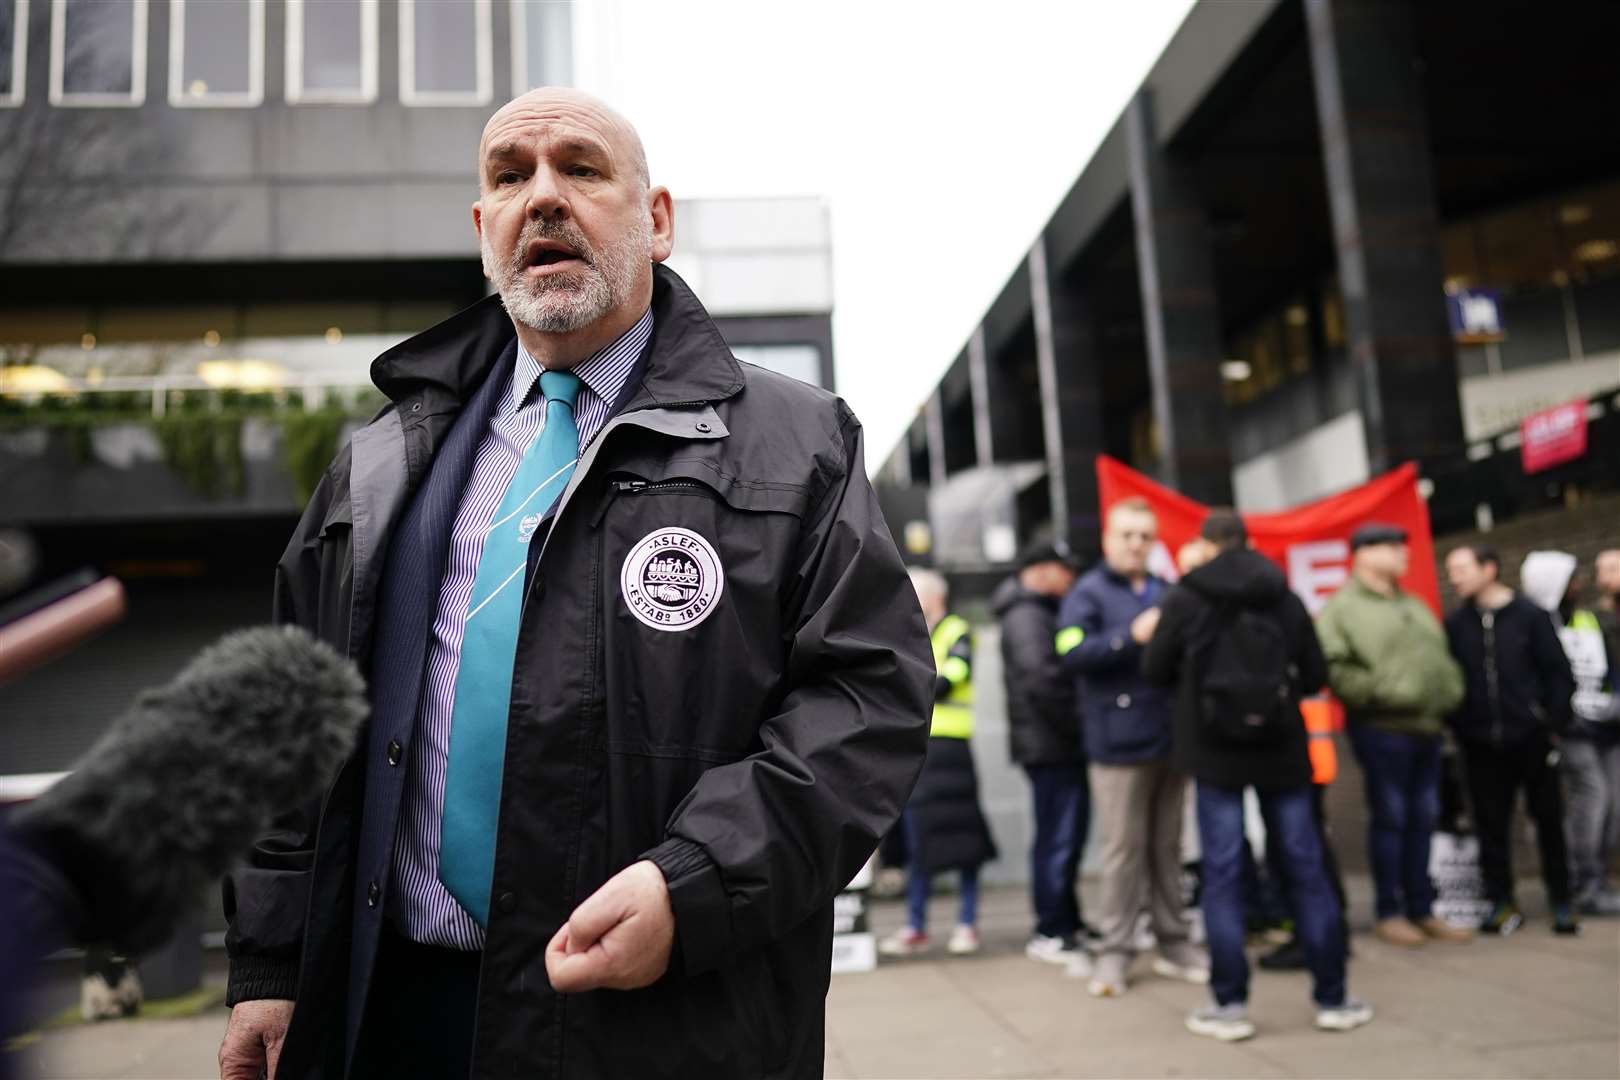 Aslef leader Mick Whelan speaks to the media on the picket line at London Euston station on Thursday (Aaron Chown/PA)